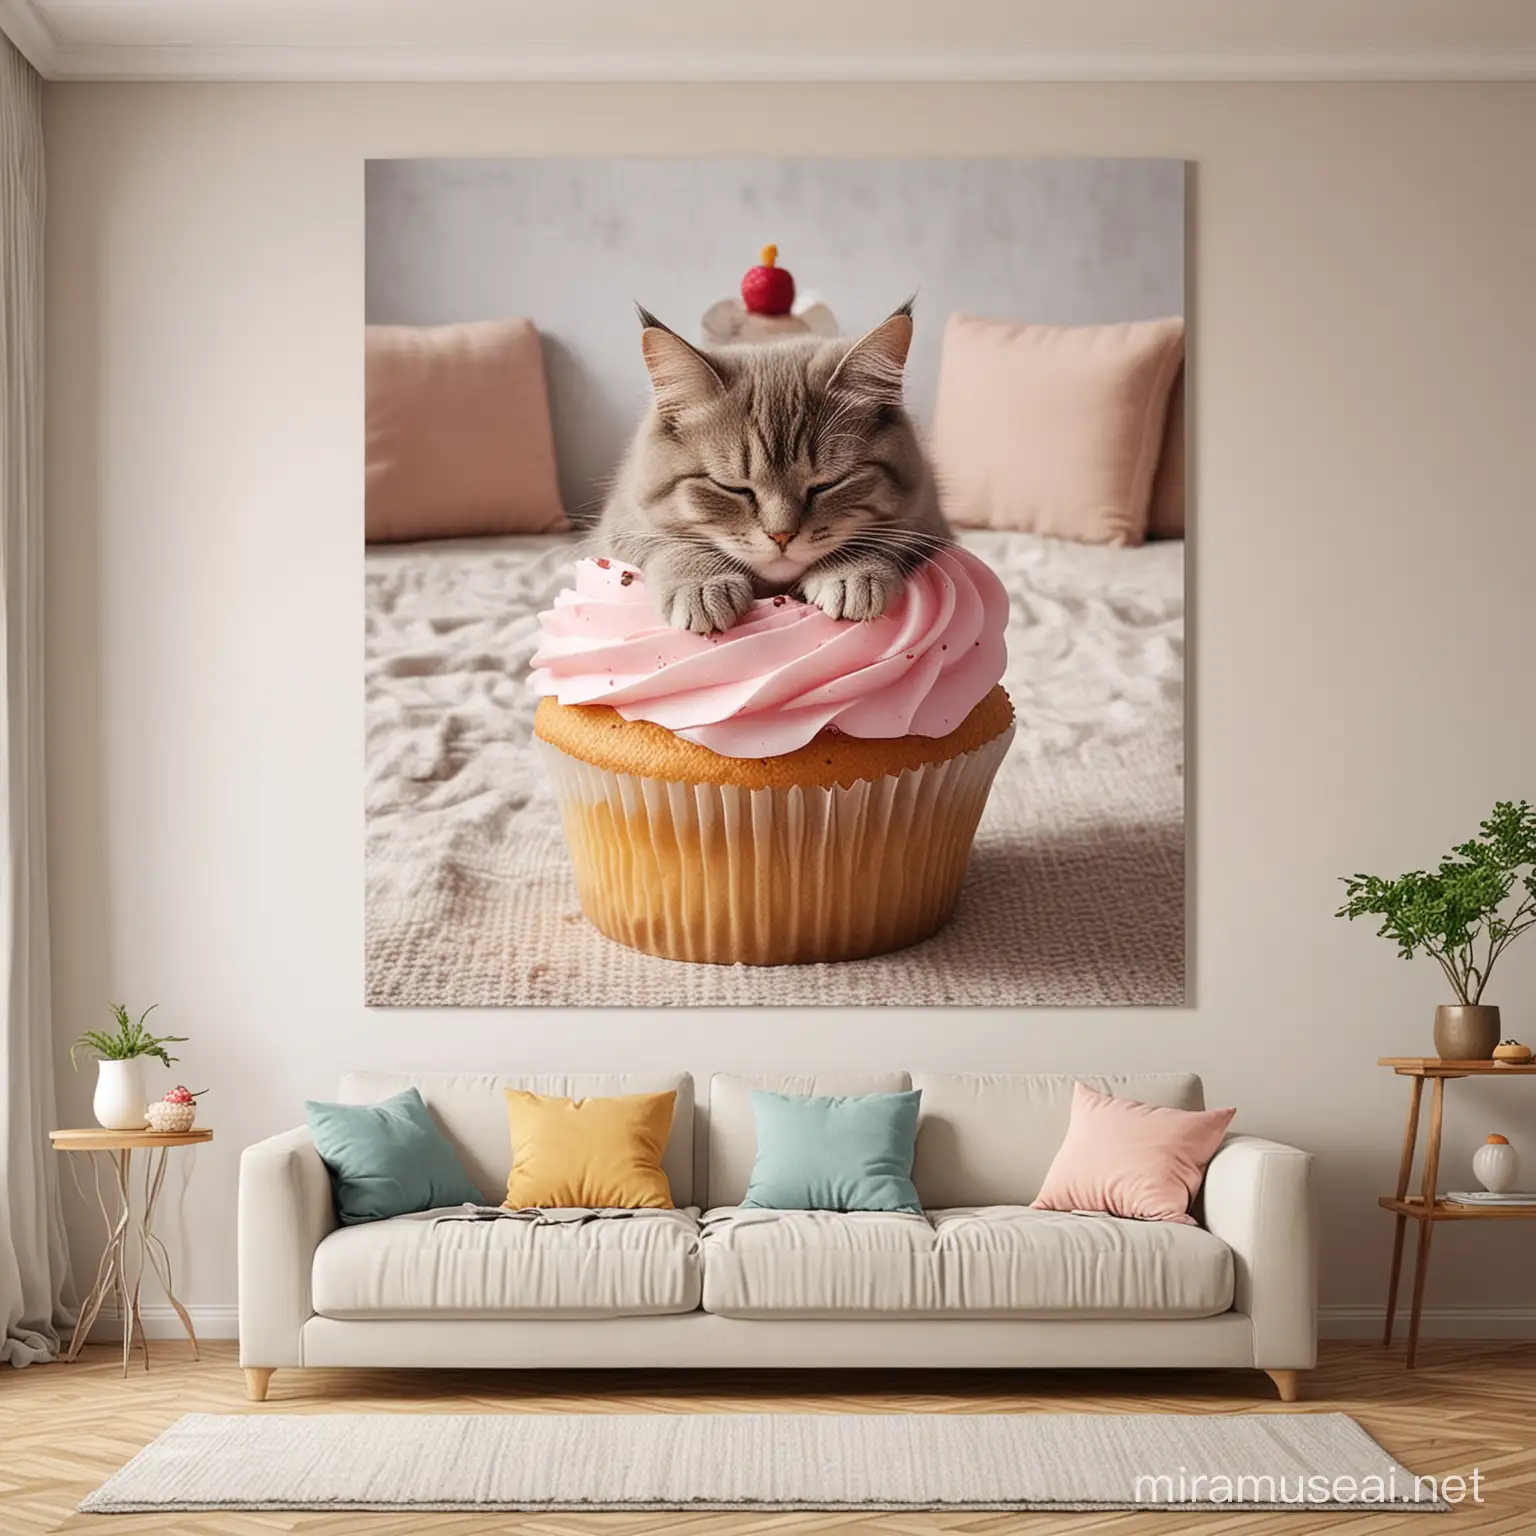 a cute cat is sleeping in the living room, with a huge cupcake photo on the wall